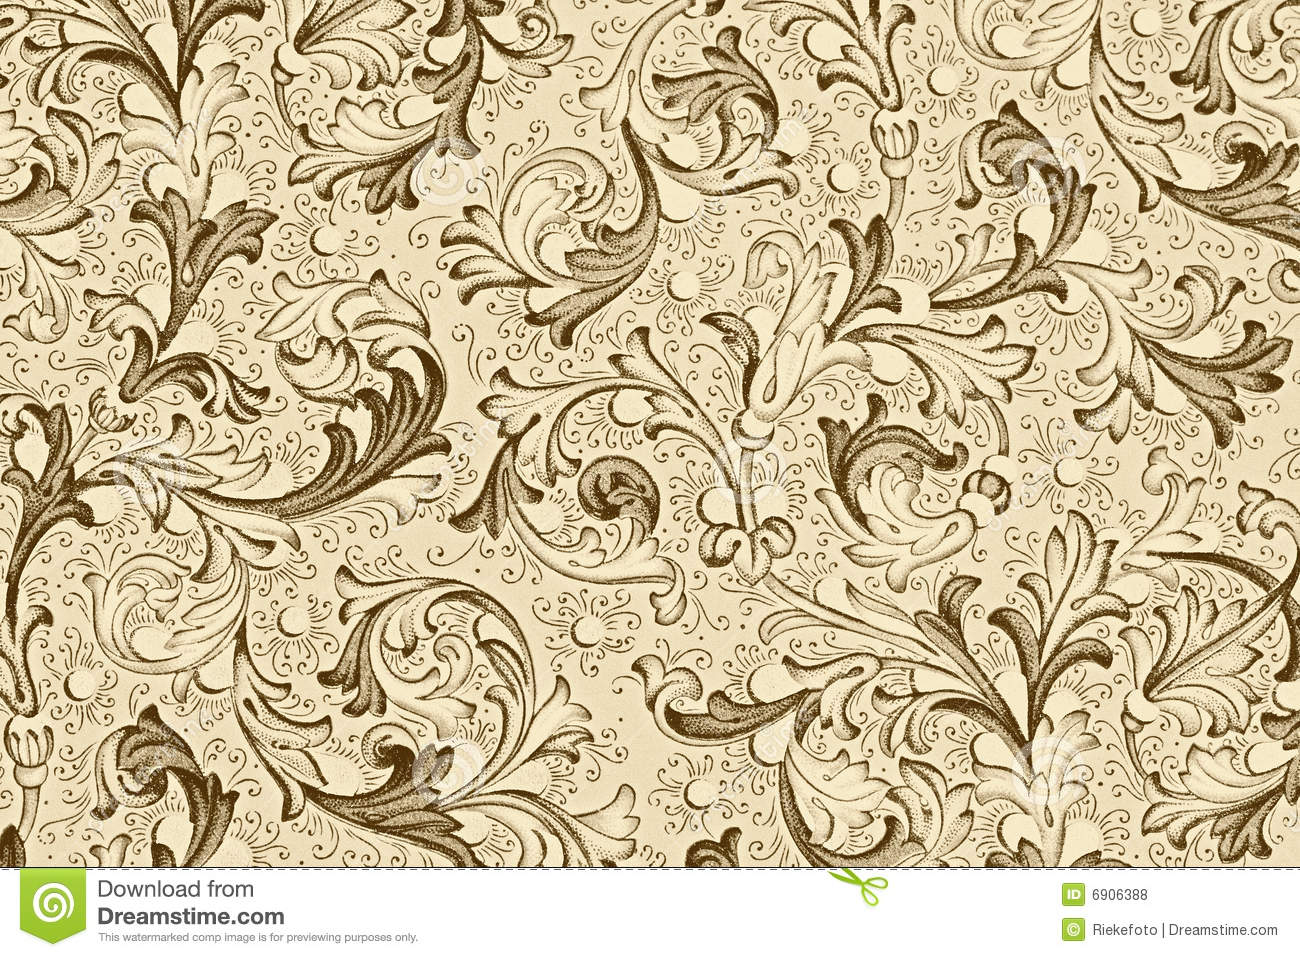 Vintage Floral Patterns   HD Wallpapers Pretty